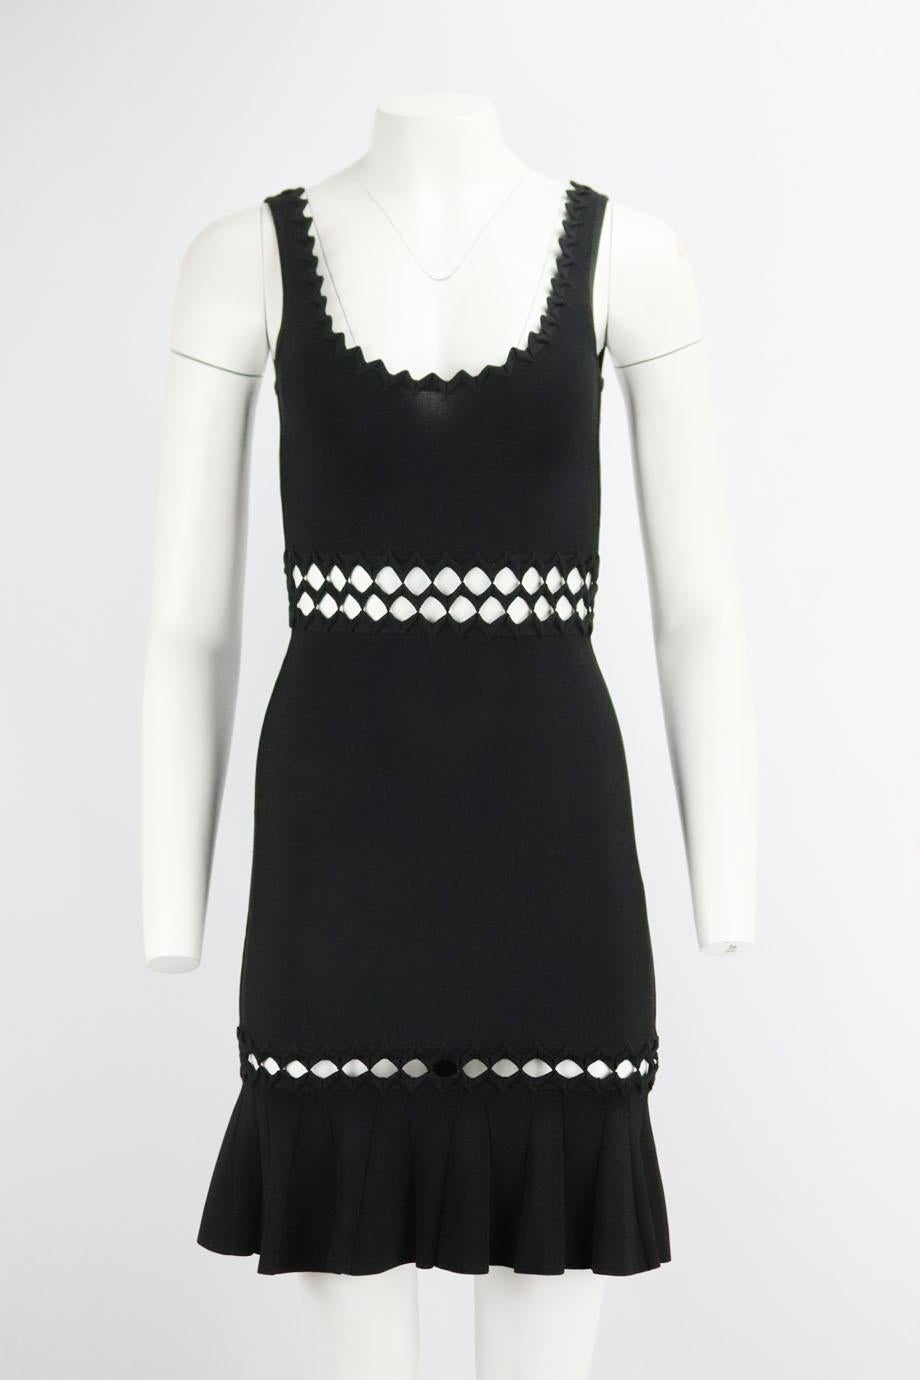 Herve Leger cutout stretch knit mini dress. Black. Sleeveless, crewneck. Hook and zip fastening at back. 90% Rayon, 9% nylon, 1% spandex. Size: XSmall (UK 6, US 2, FR 34, IT 38). Bust: 27 in. Waist: 23 in. Hips: 26.5 in. Length: 34 in. Very good